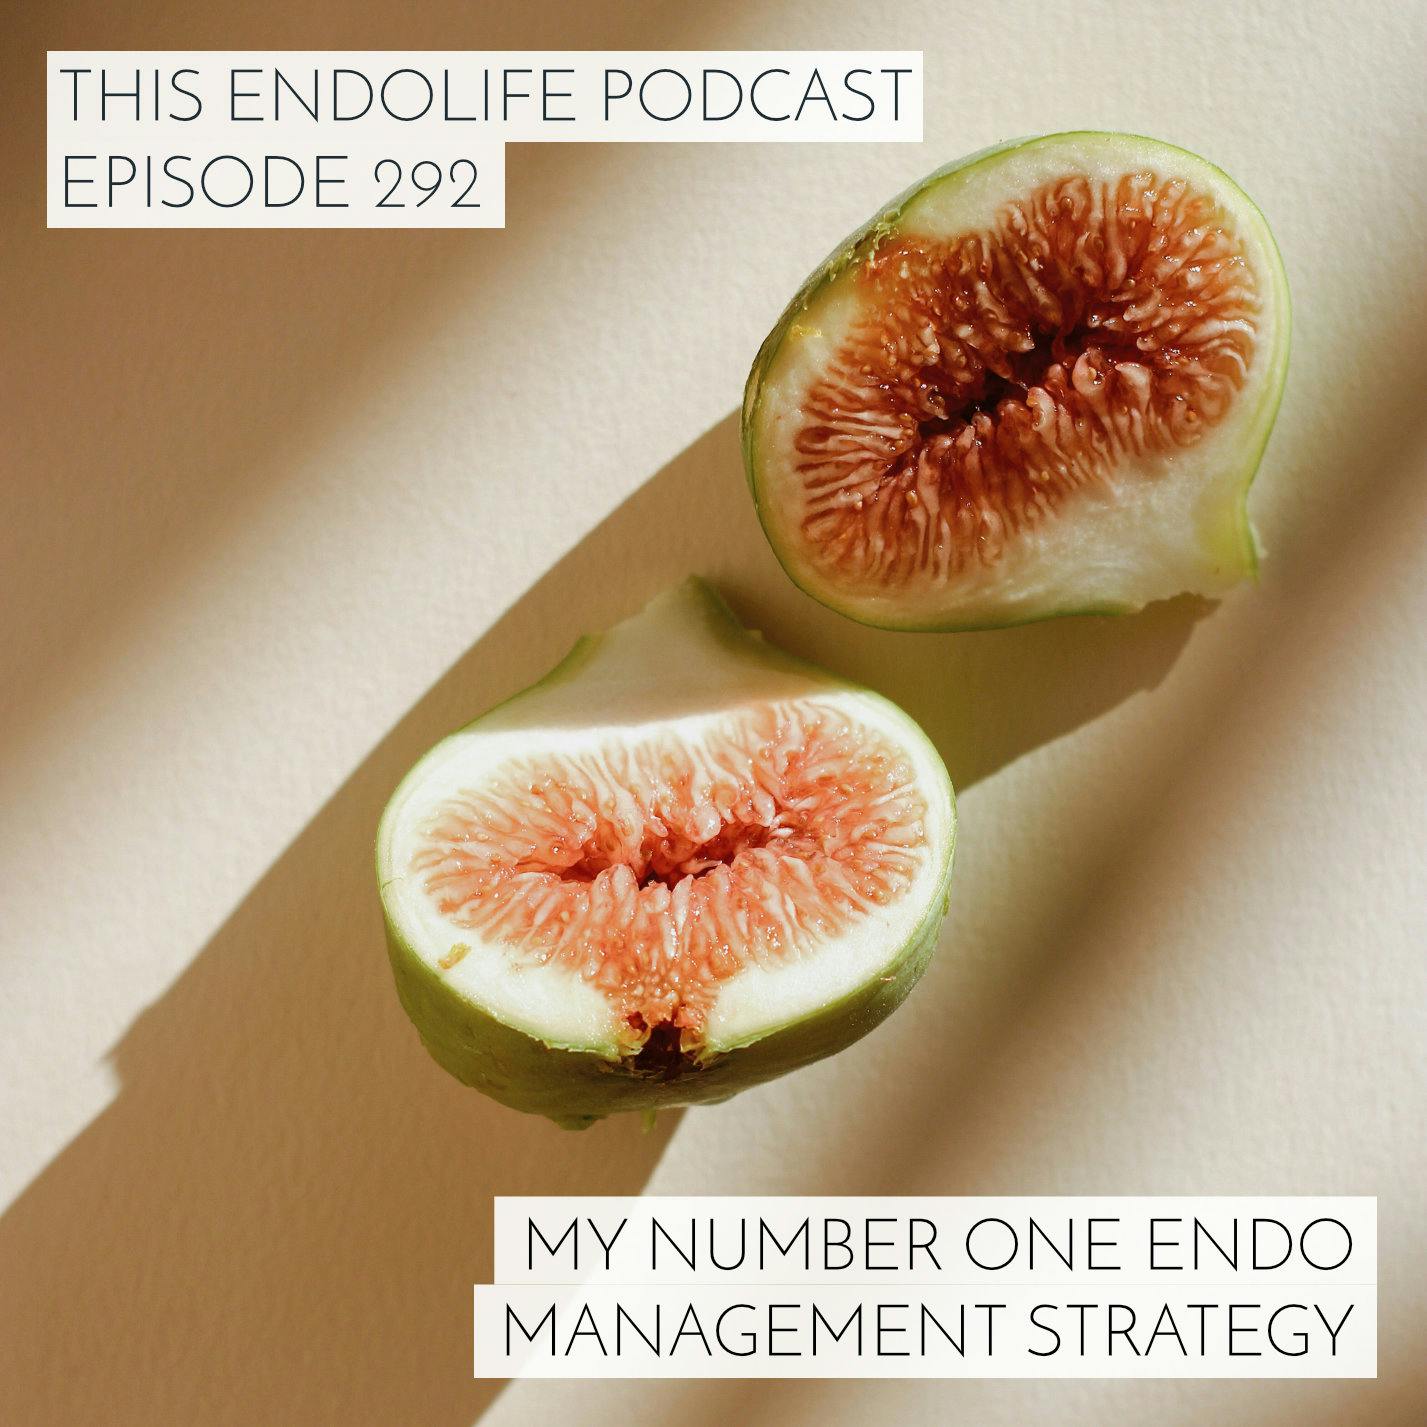 My Number One Endo Management Strategy